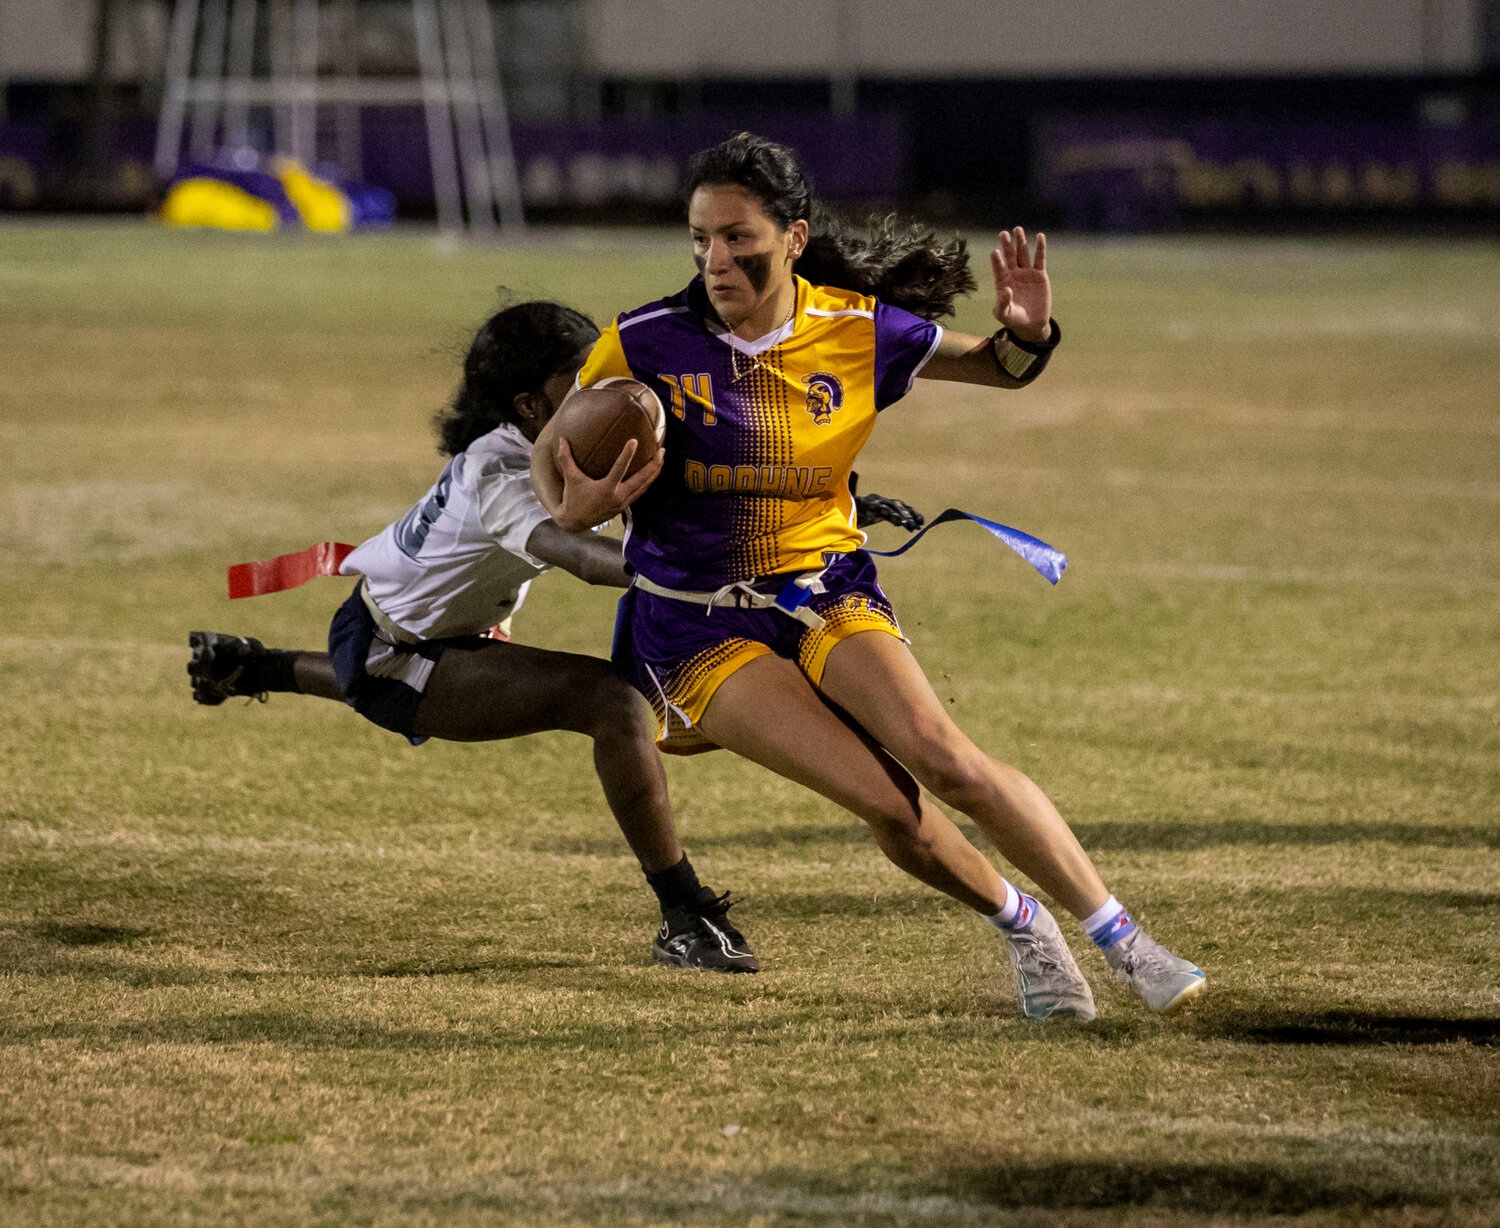 Junior Lex Charqueno escapes an Alma-Bryant tackler while tight roping the sideline after a catch during the Daphne Trojans’ regional championship game against the Hurricanes on Monday, Oct. 30, at Jubilee Stadium. Charqueno caught a touchdown pass that helped Daphne punch its ticket to the state tournament in its inaugural season.